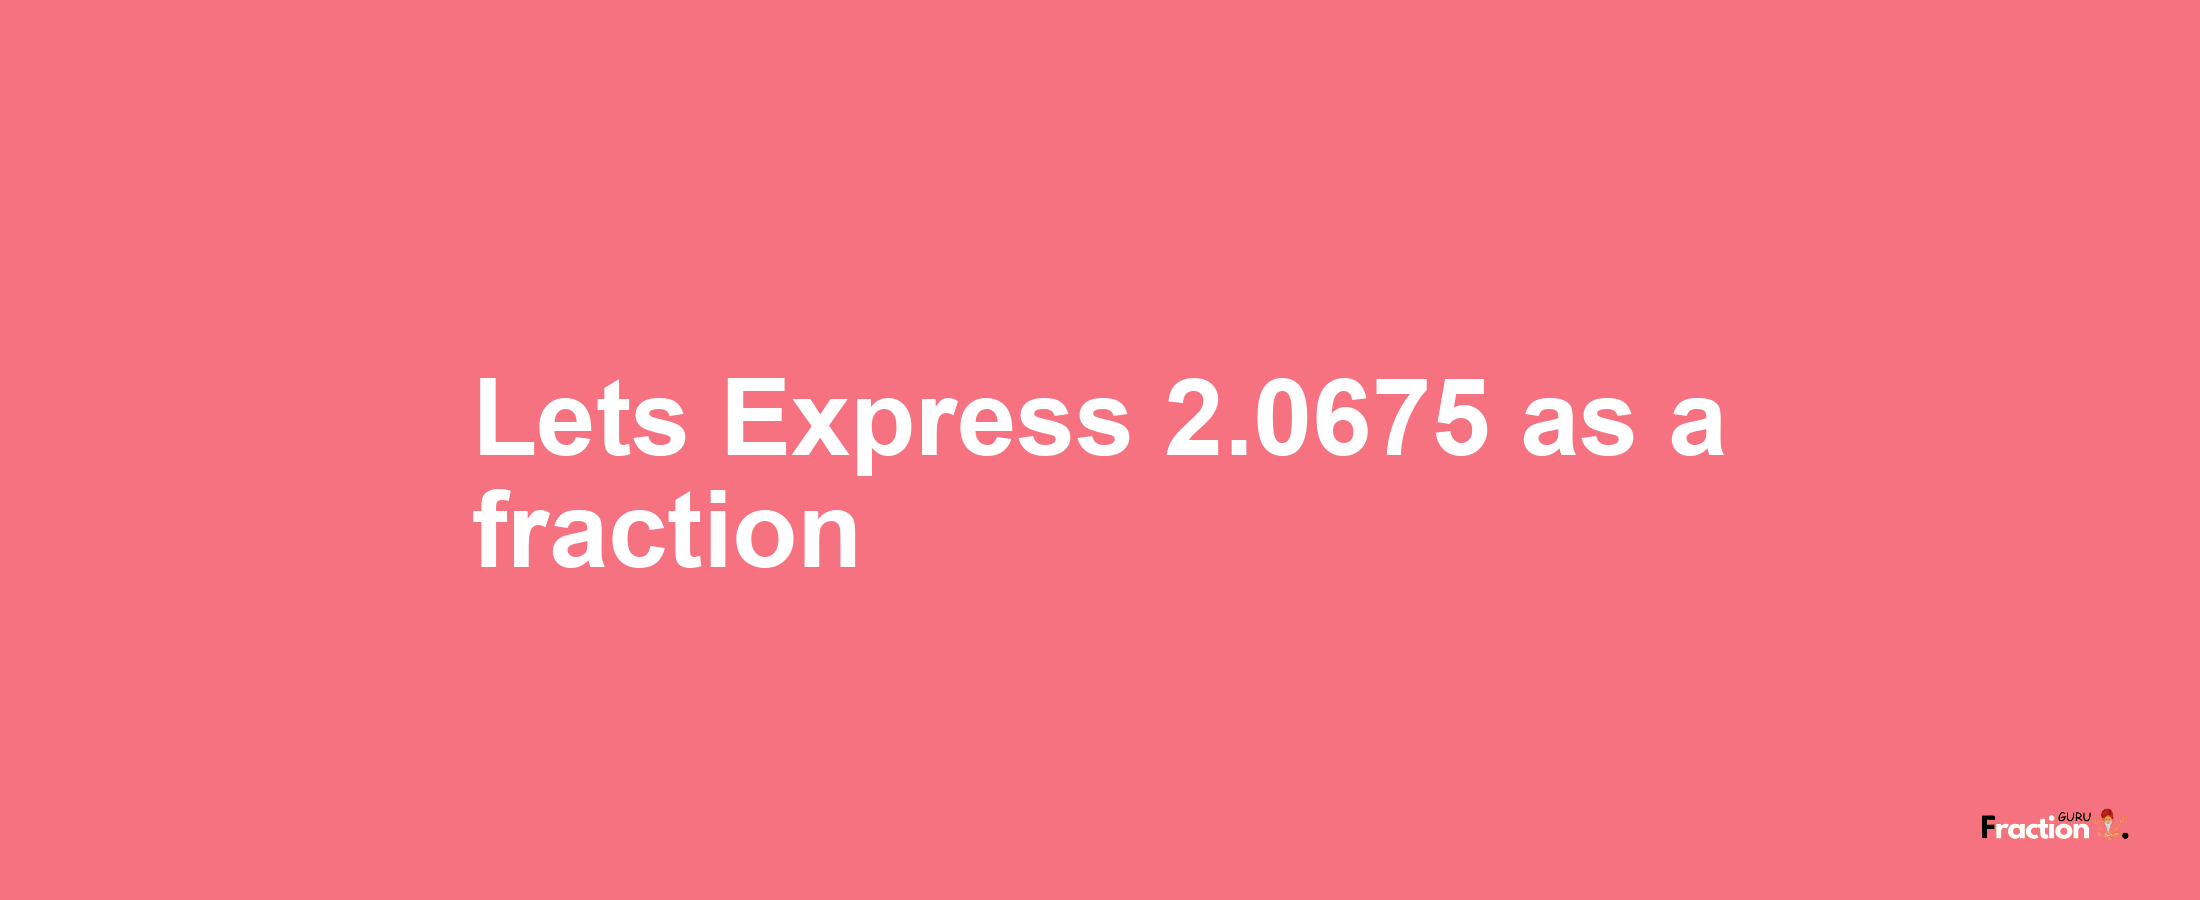 Lets Express 2.0675 as afraction